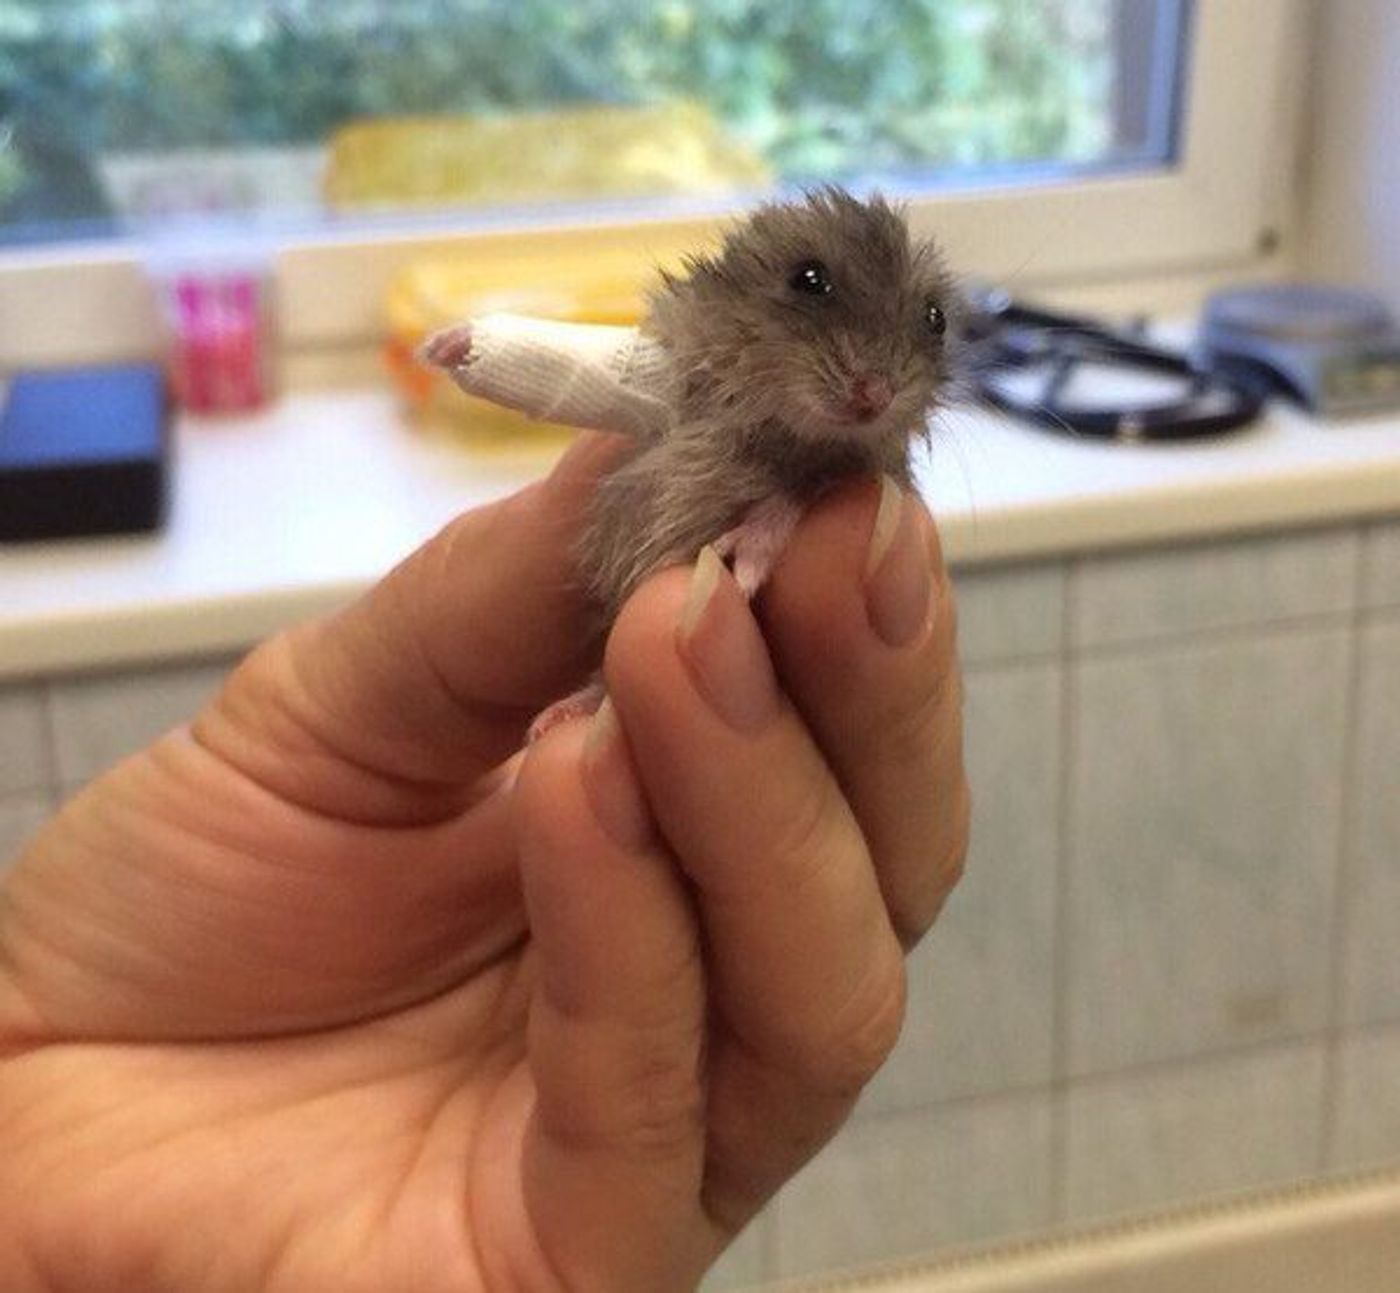 The mystery hamster with its cute little cast to treat his injury.